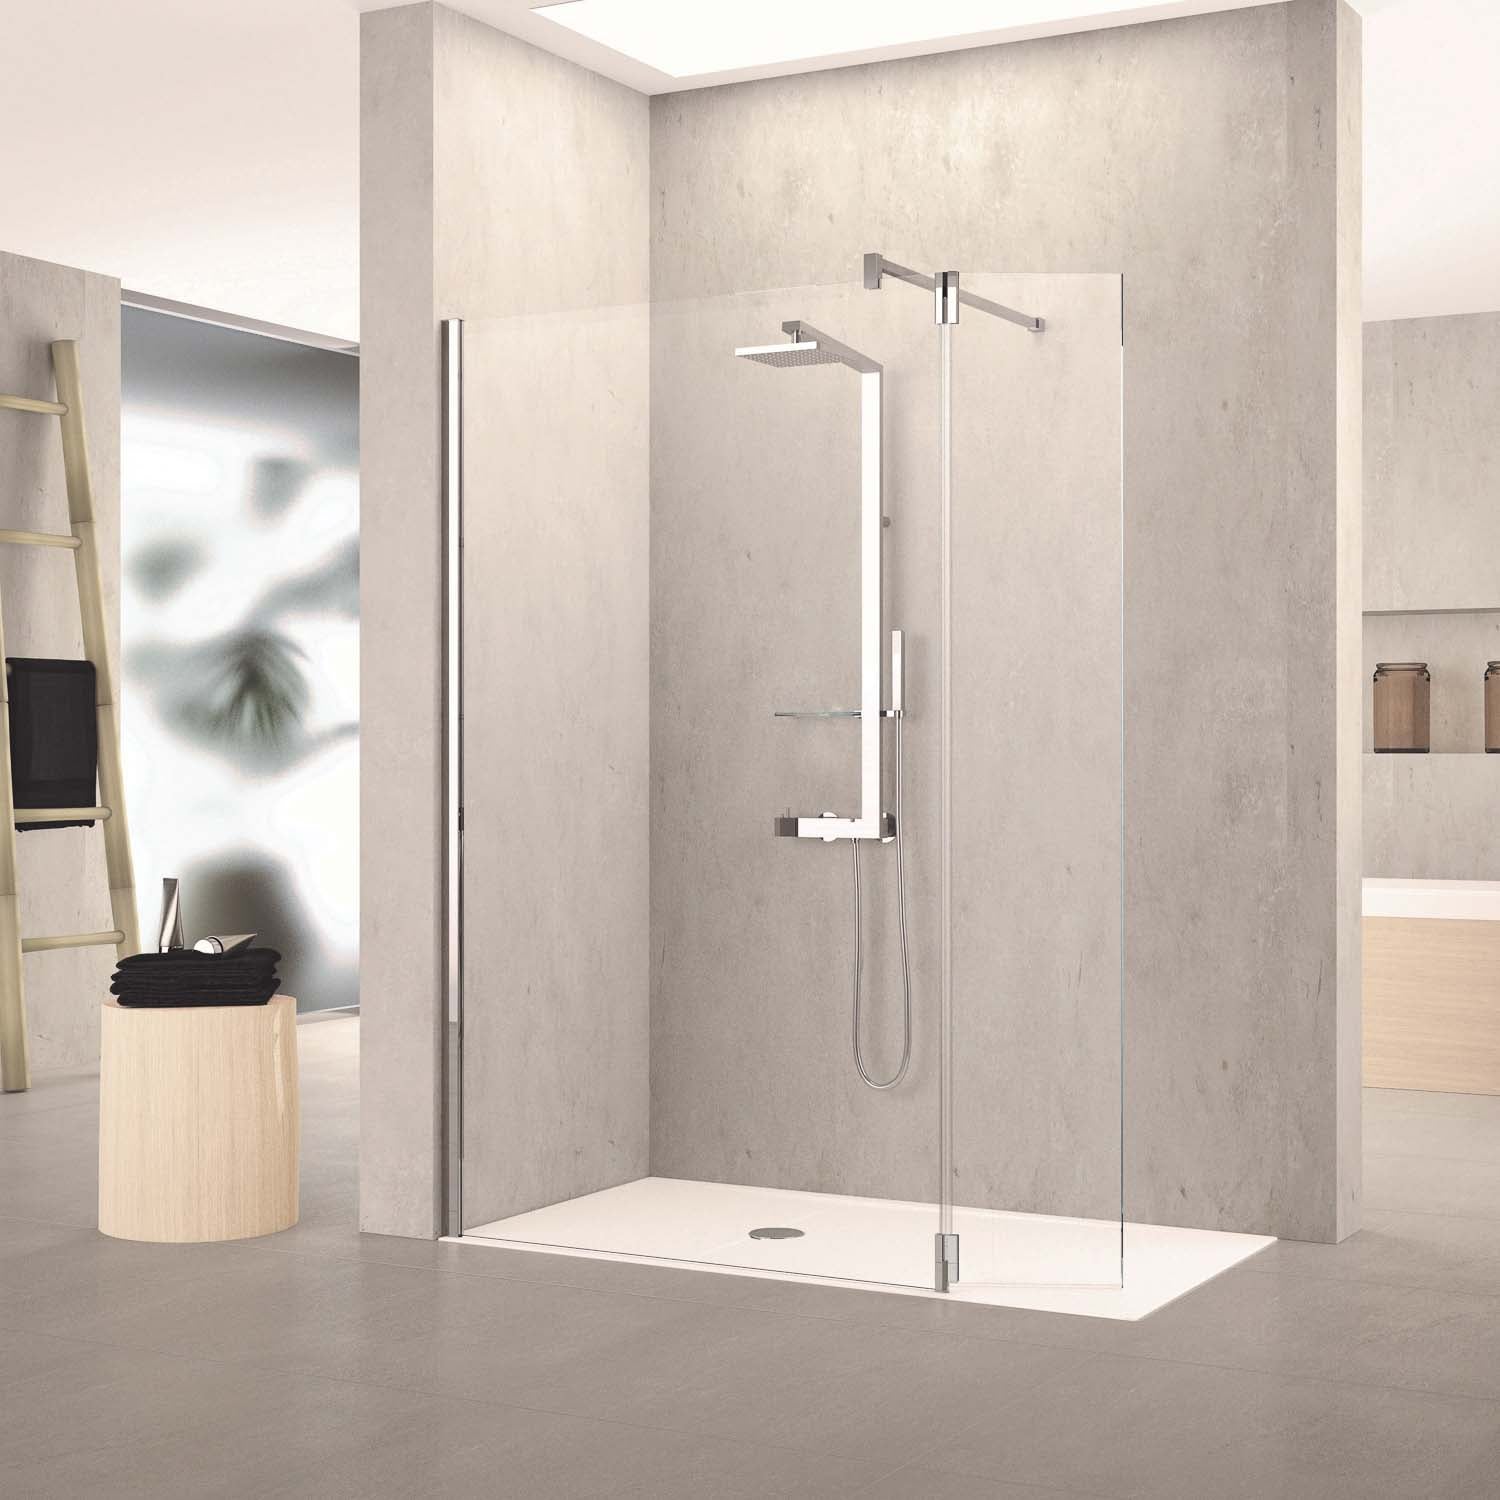 870-900mm Ergo Wet Room Screen Clear Glass with a chrome finish lifestyle image